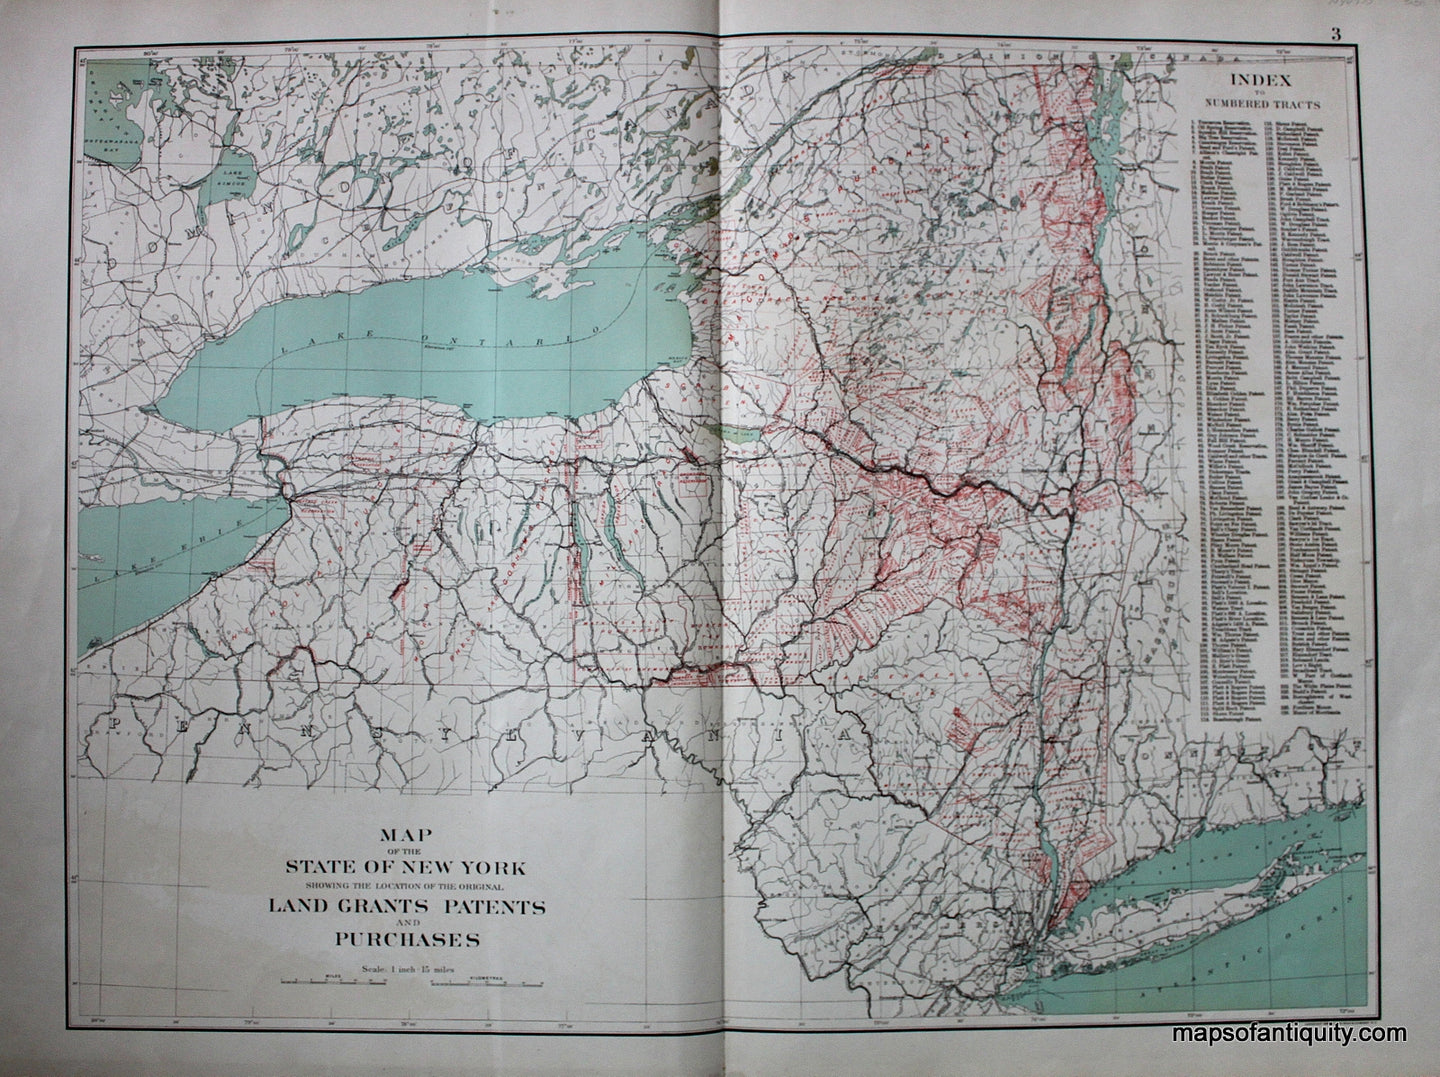 Antique-Map-Printed-Color-Map-of-the-State-of-New-York-Showing-the-Location-of-the-Original-Land-Grants-Patents-and-Purchases-United-States-Northeast-1895-Bien-Maps-Of-Antiquity